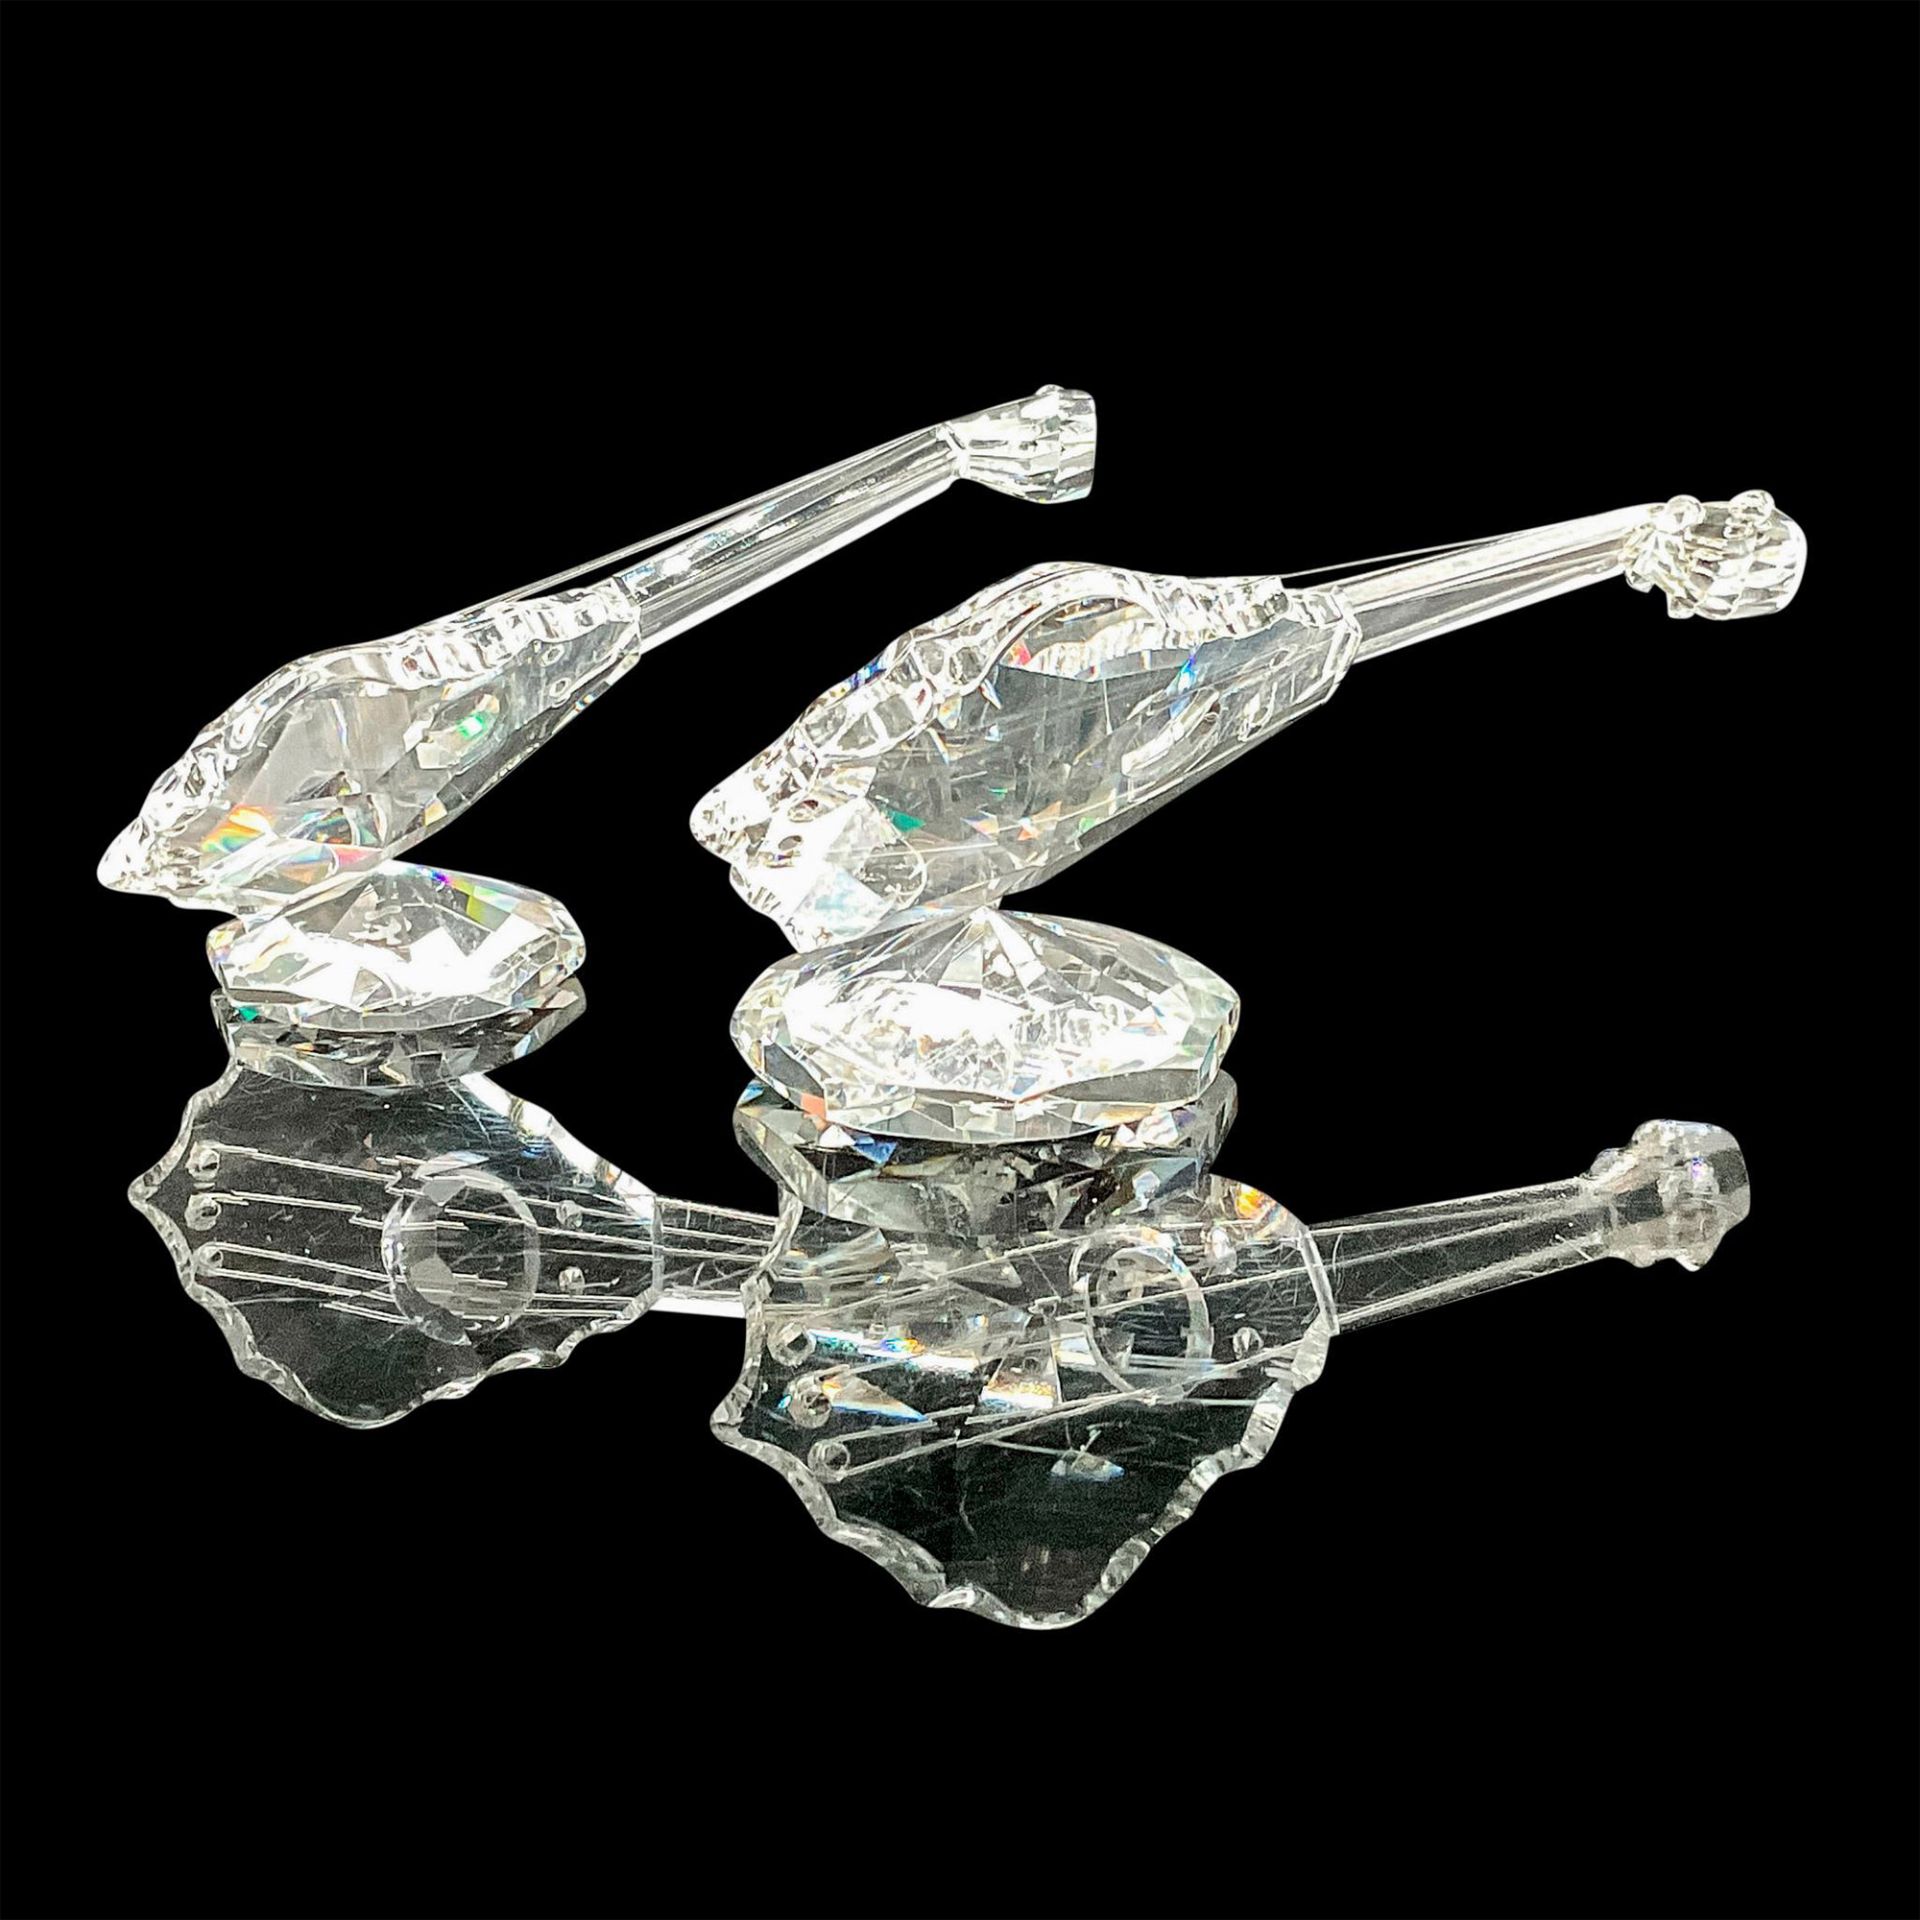 Pair of Asfour Crystal Figurines, Guitars - Image 2 of 3